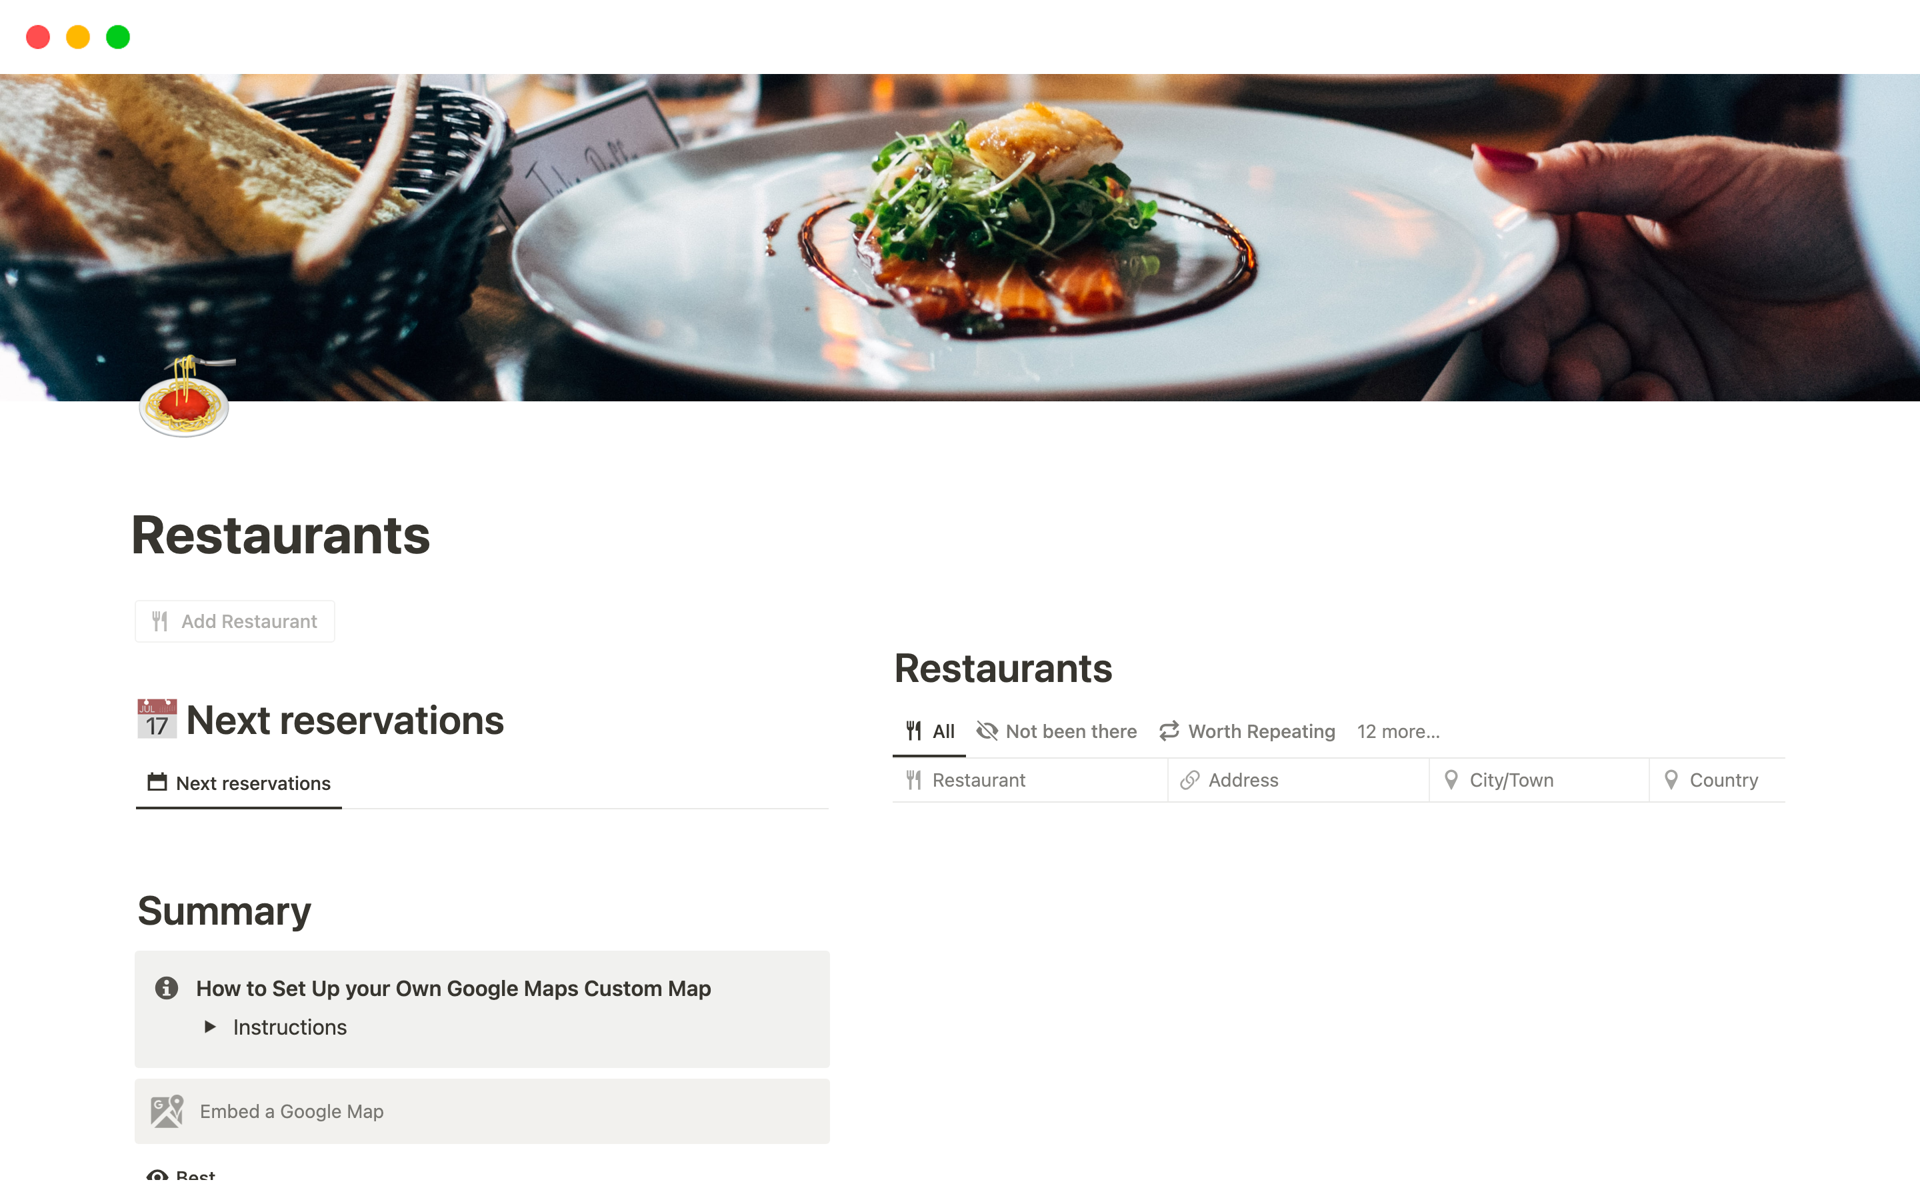 Elevate your dining experience with our Restaurant Tracking Tool Notion Template - track reservations, locate restaurants, rate and categorize, and get a comprehensive overview of your options. Upgrade now!